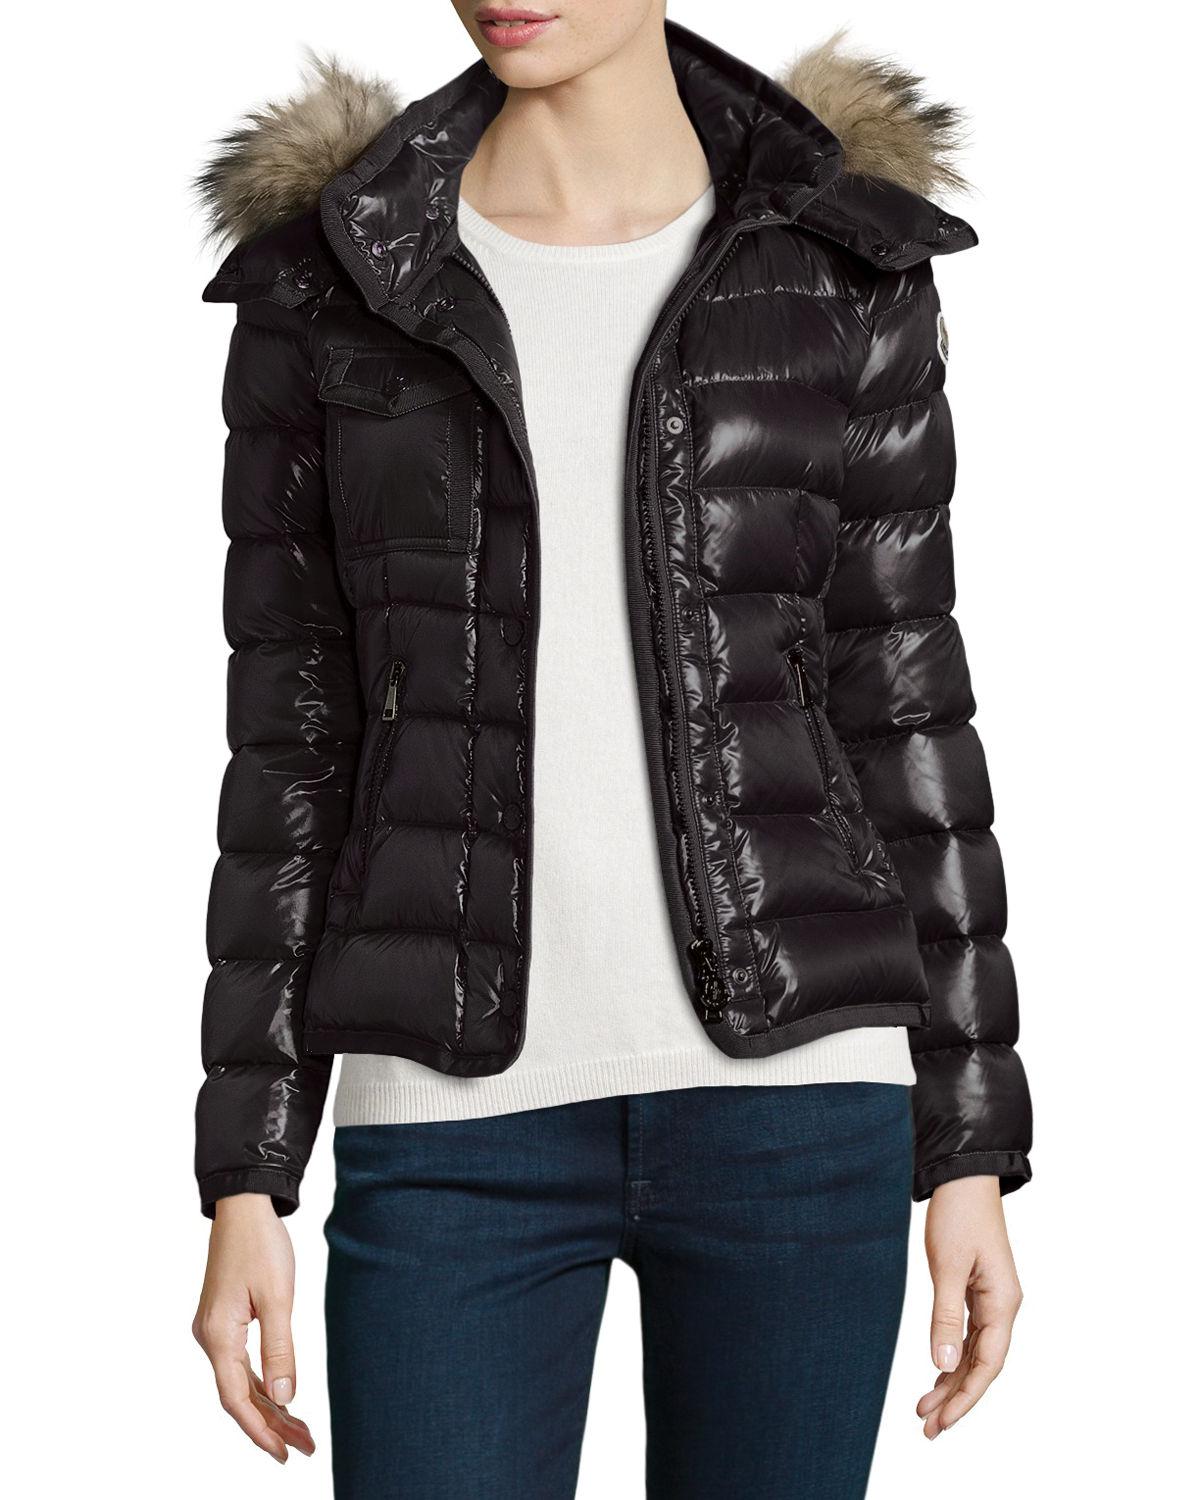 Lyst - Moncler Armoise Shiny Quilted Jacket in Black